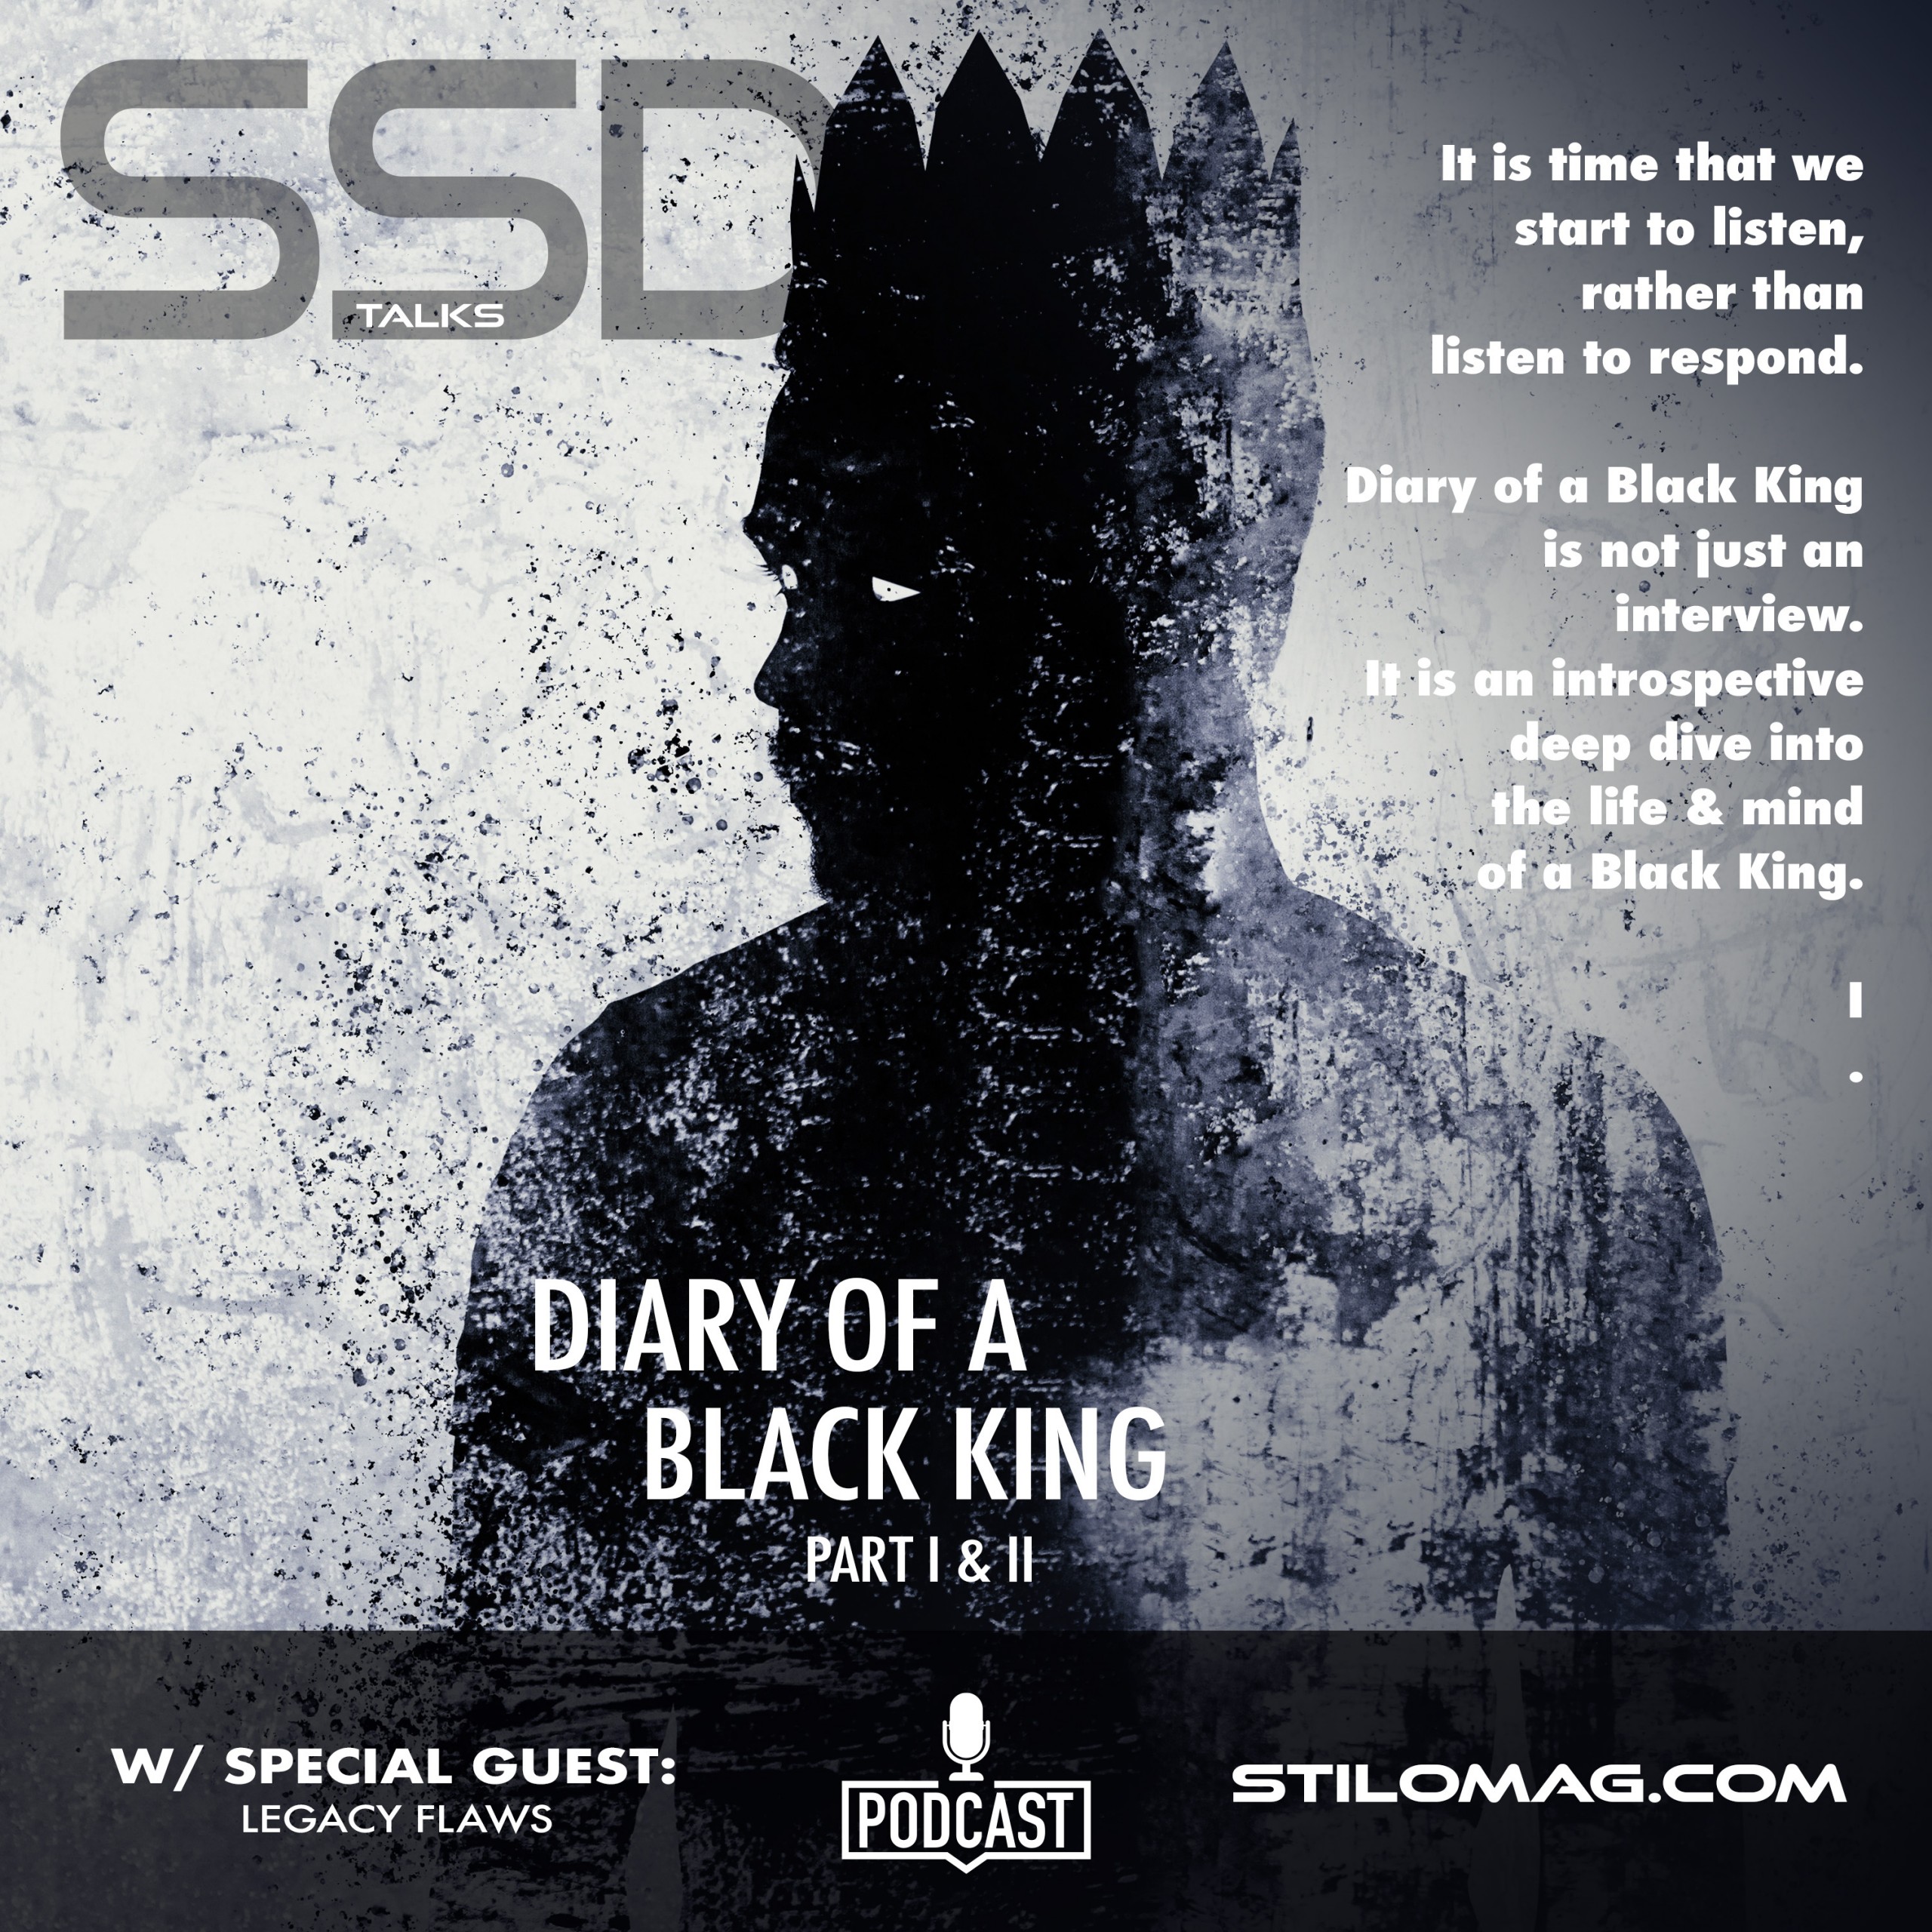 Diary of a Black King, Part II